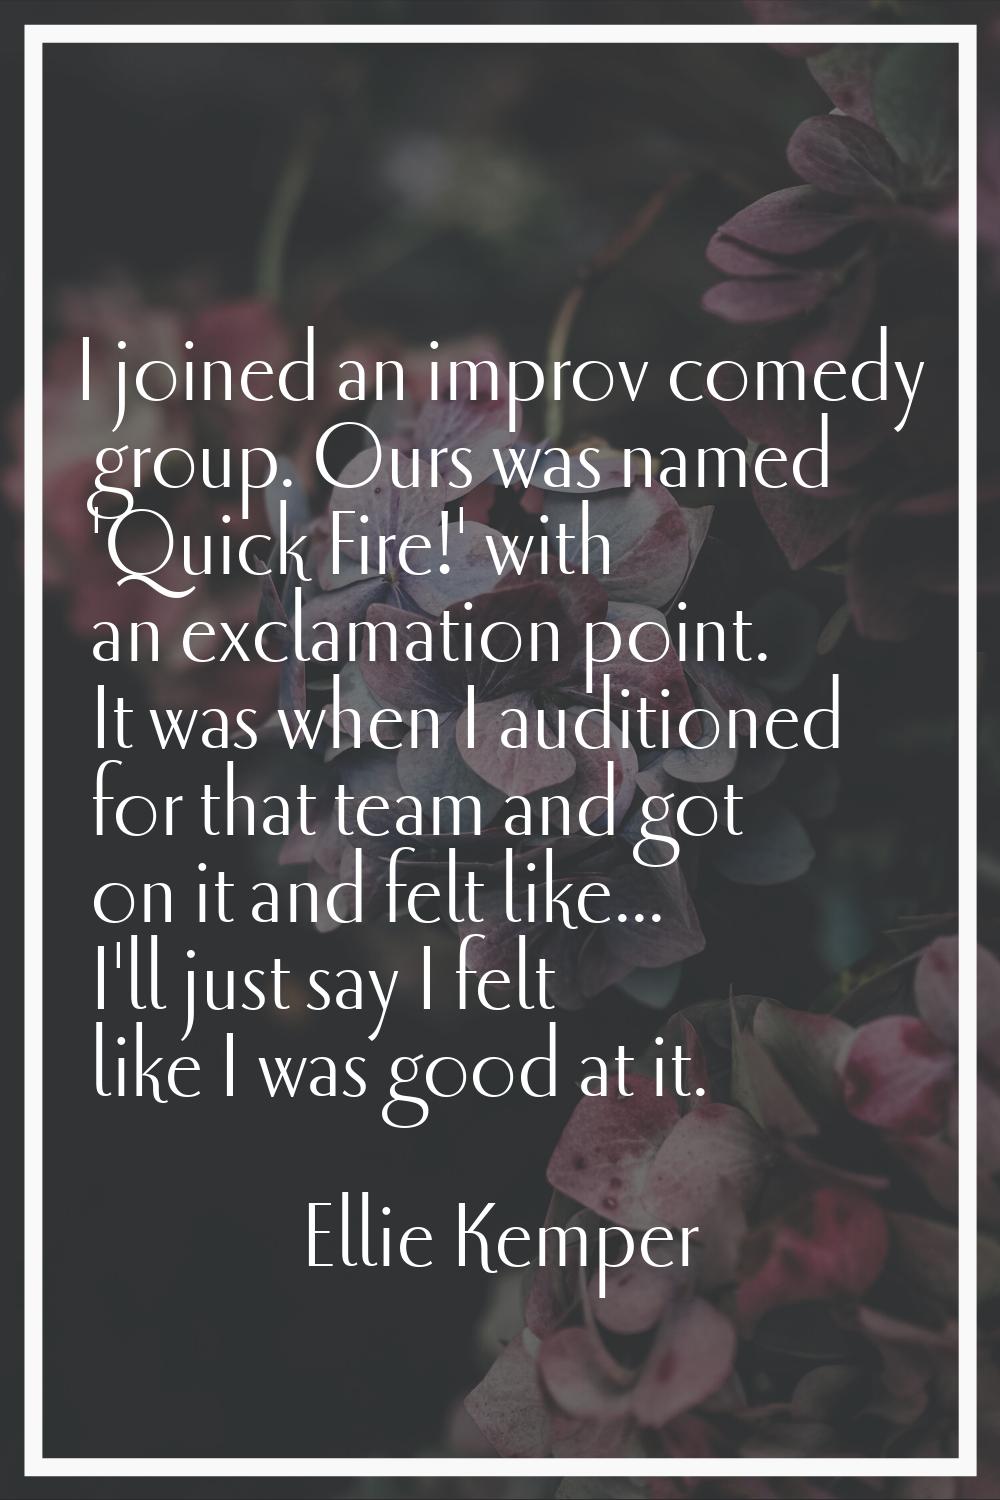 I joined an improv comedy group. Ours was named 'Quick Fire!' with an exclamation point. It was whe